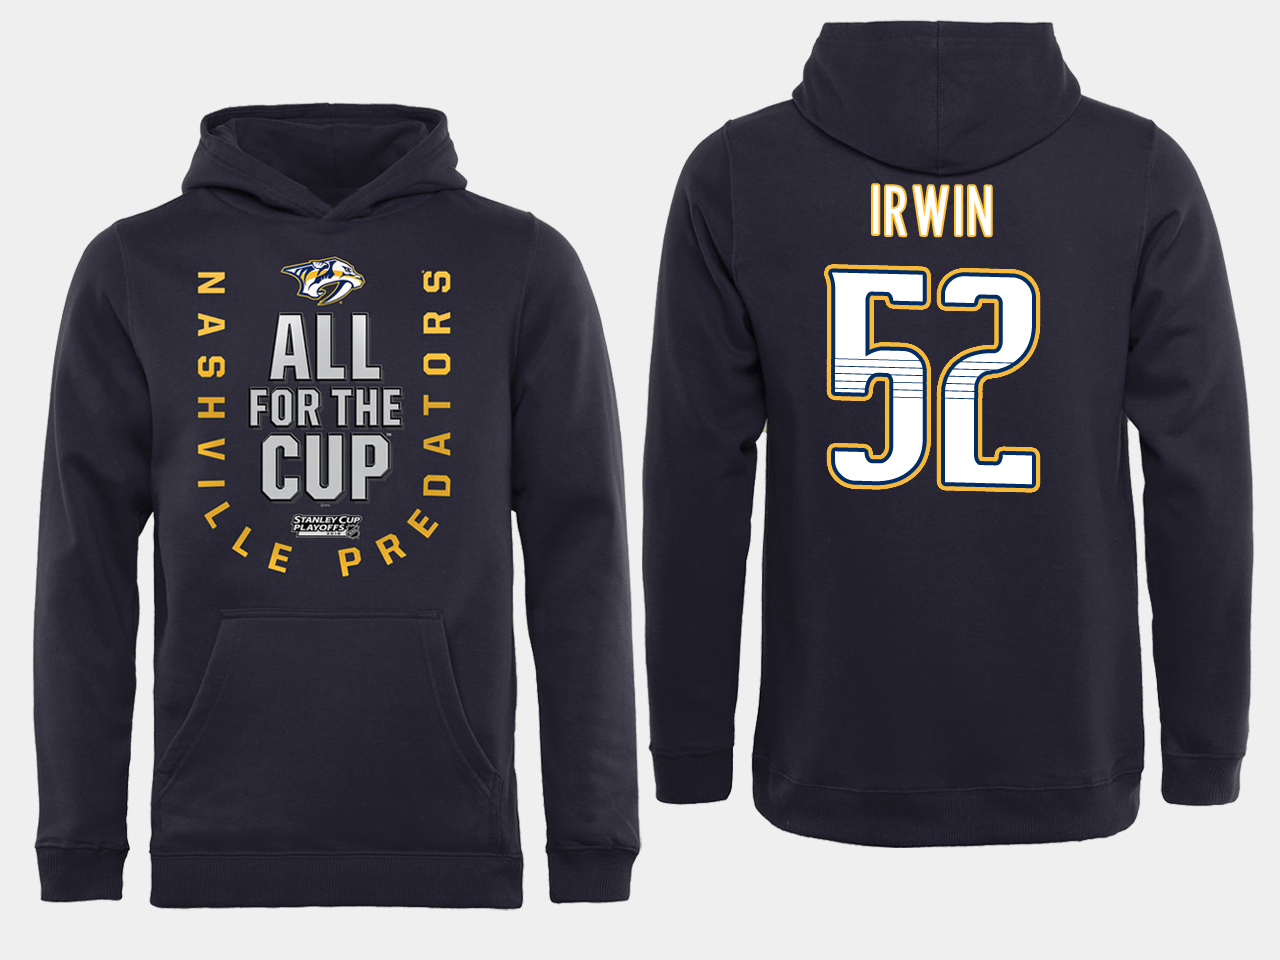 Men NHL Adidas Nashville Predators #52 Irwin black ALL for the Cup hoodie->pittsburgh penguins->NHL Jersey